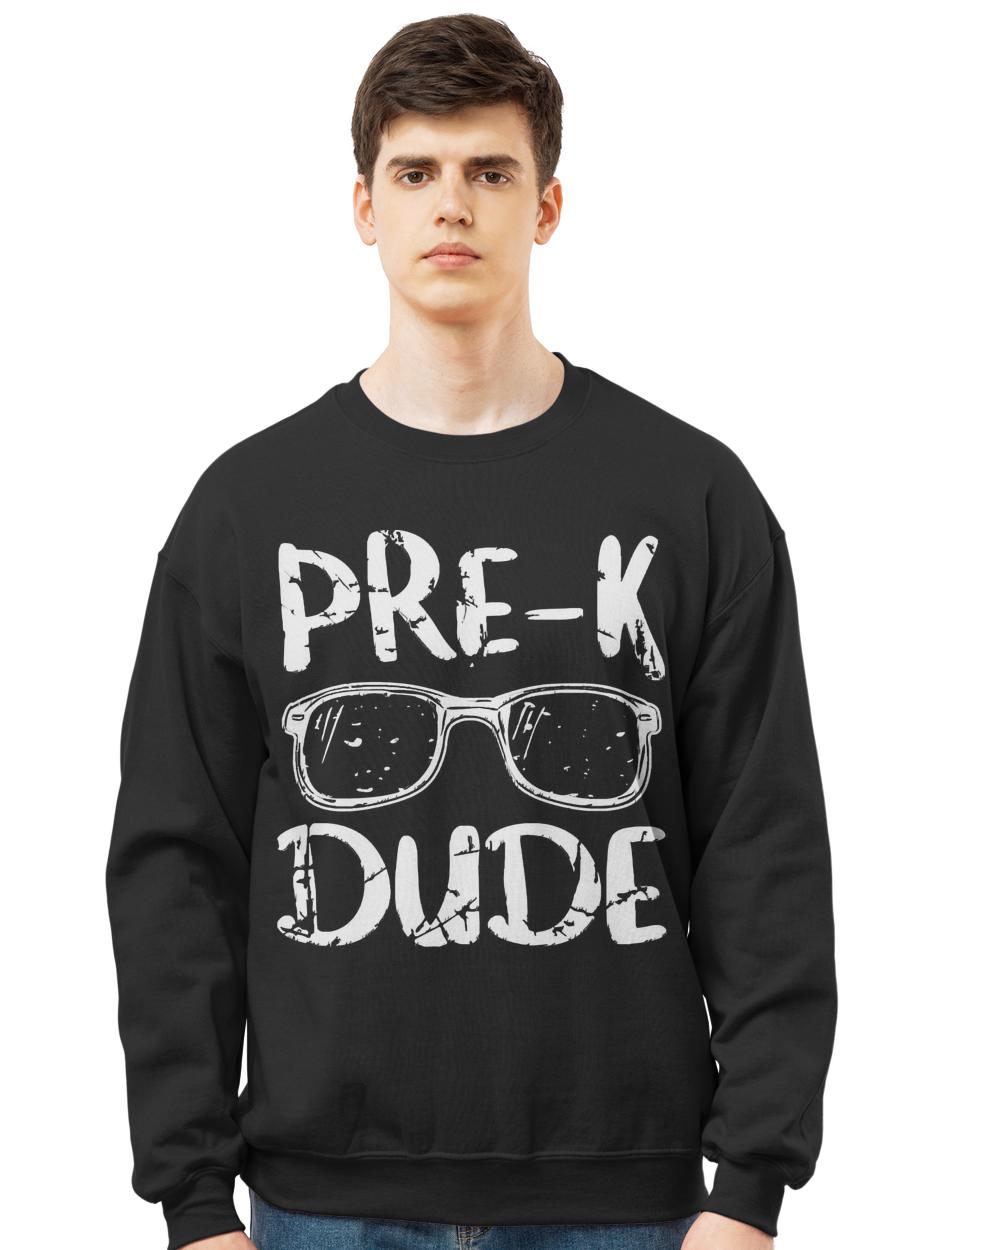 Pre K Dude T- Shirt Funny Kids Pre- K Dude First Day of School Funny Back to School Boys T- Shirt